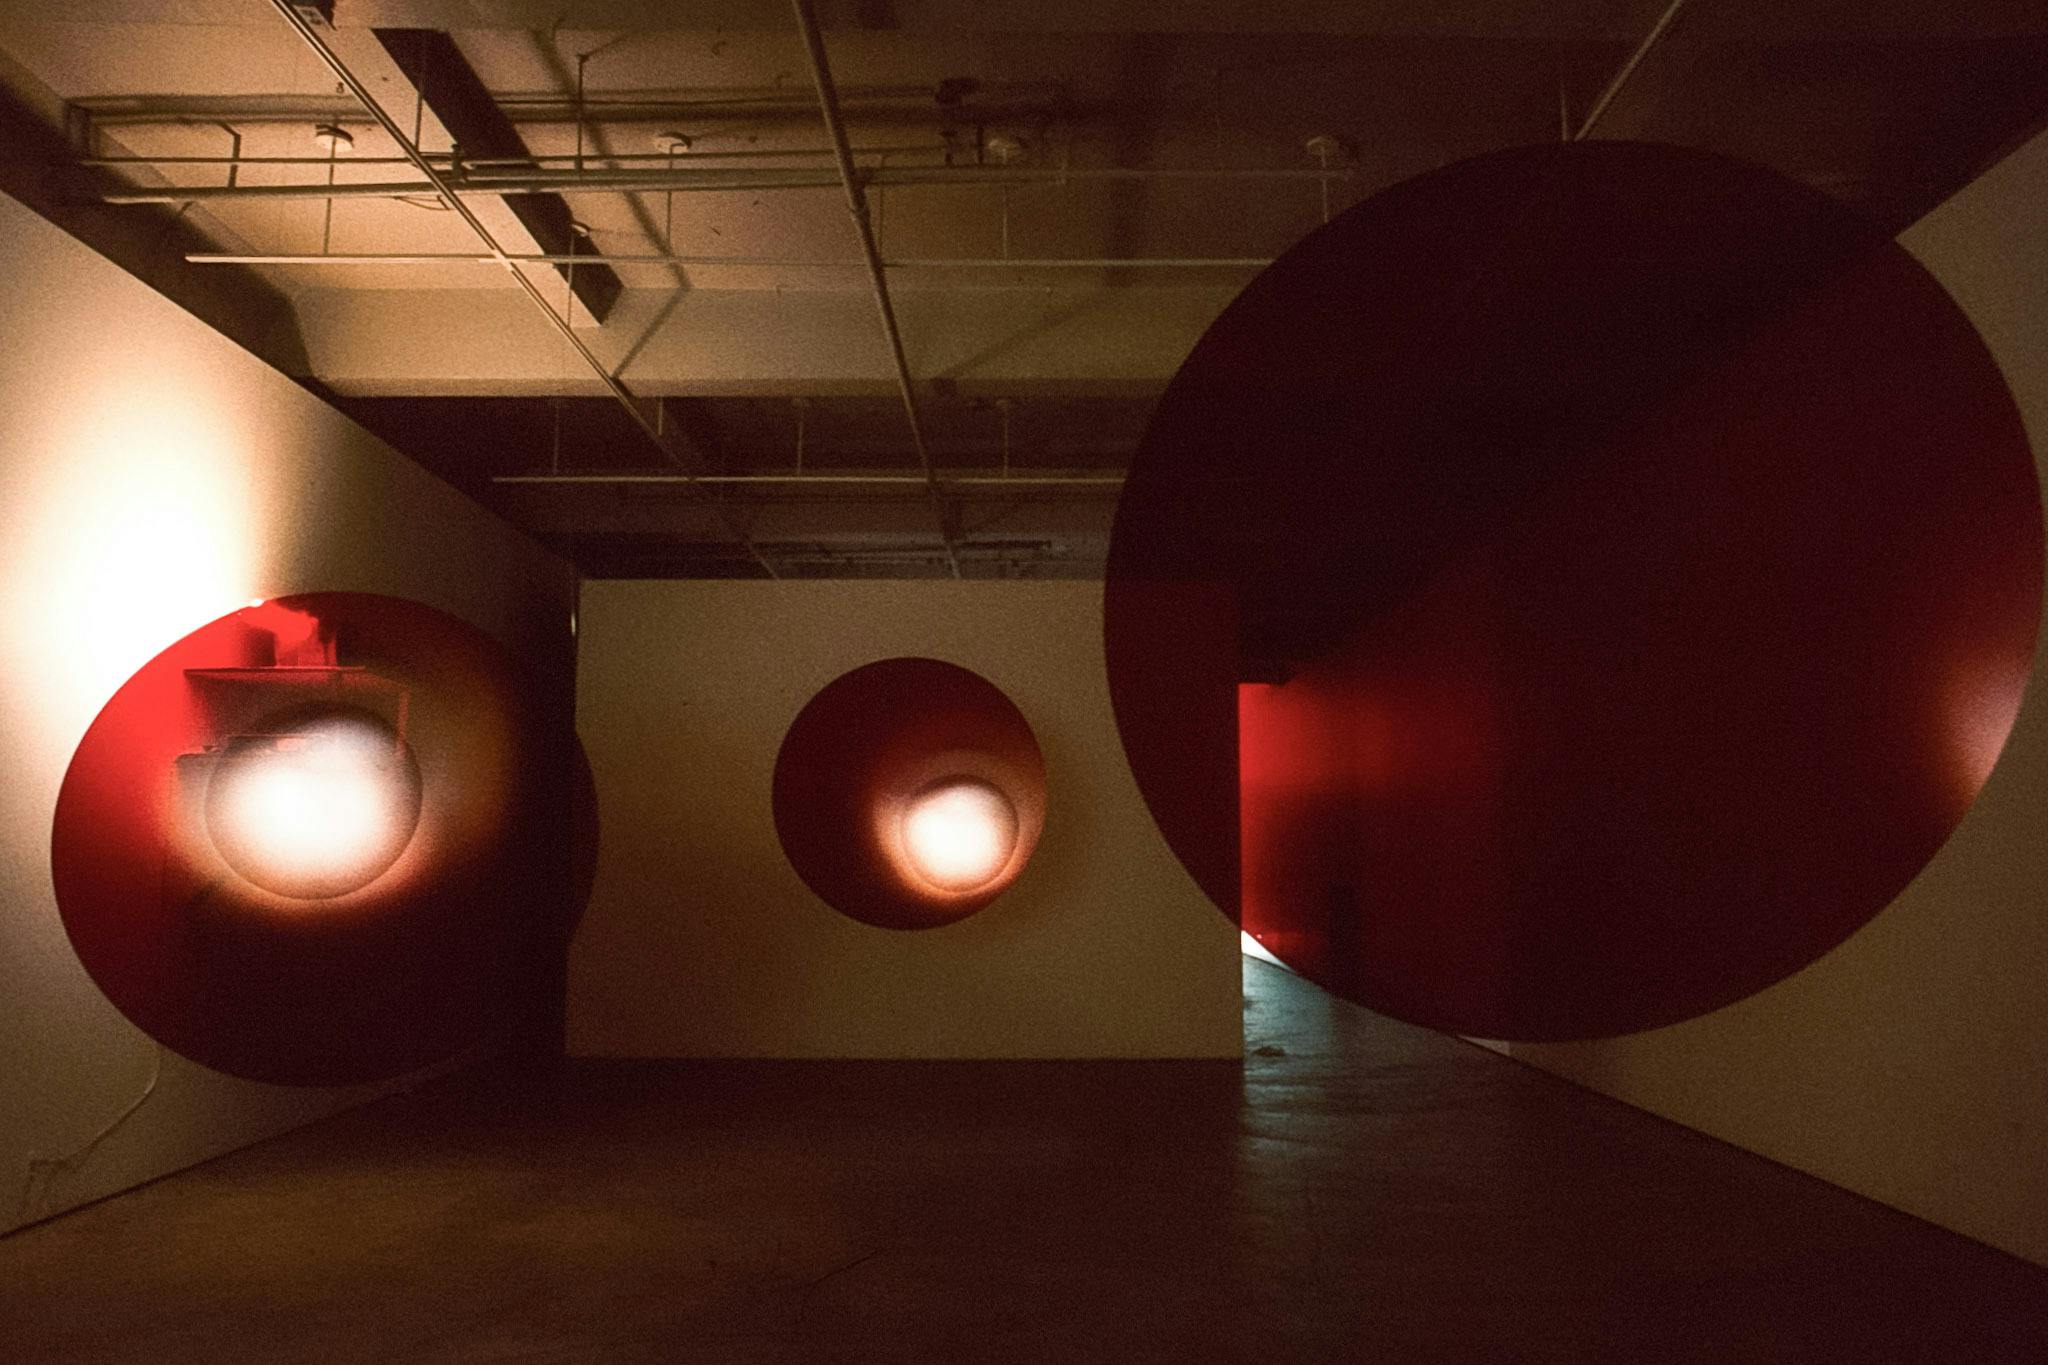 An installation view of three sculptures in the darkened gallery space. All of these sculptures, hanging from the ceiling, are large-scaped, thin, and have a red circular shape.  